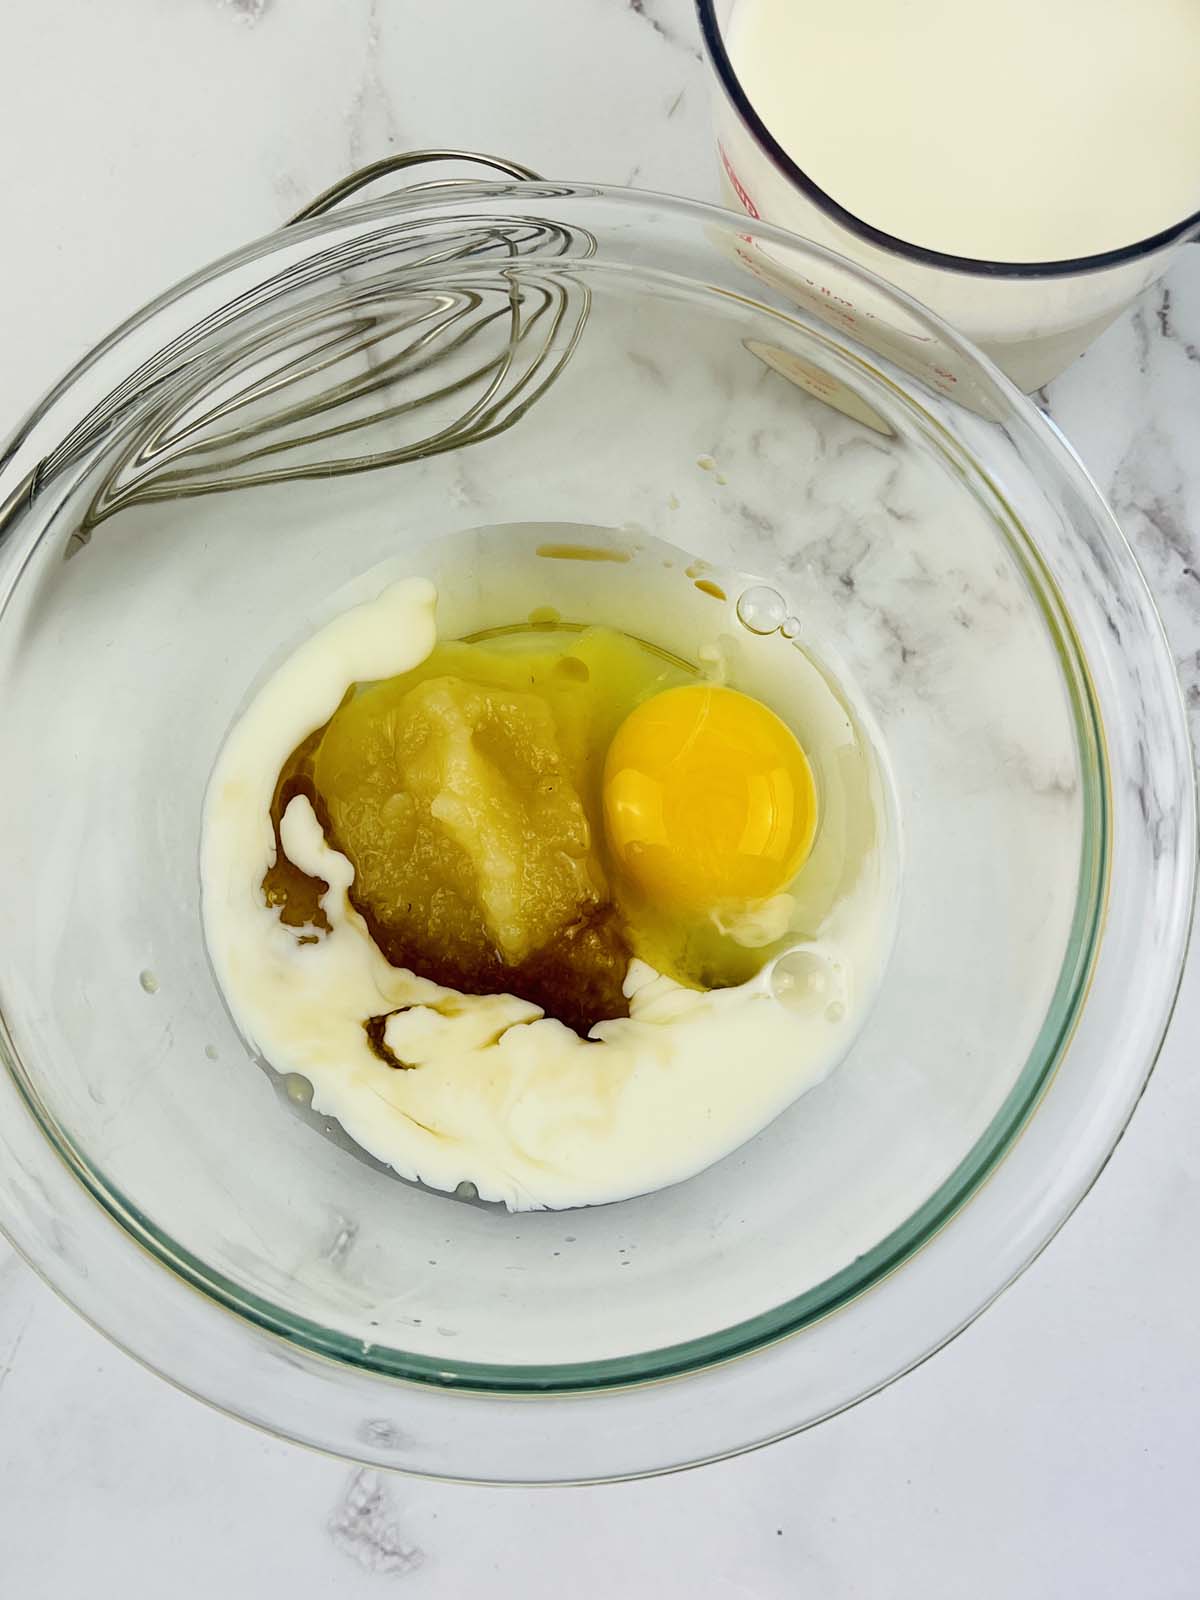 Eggs and applesauce in a mixing bowl.